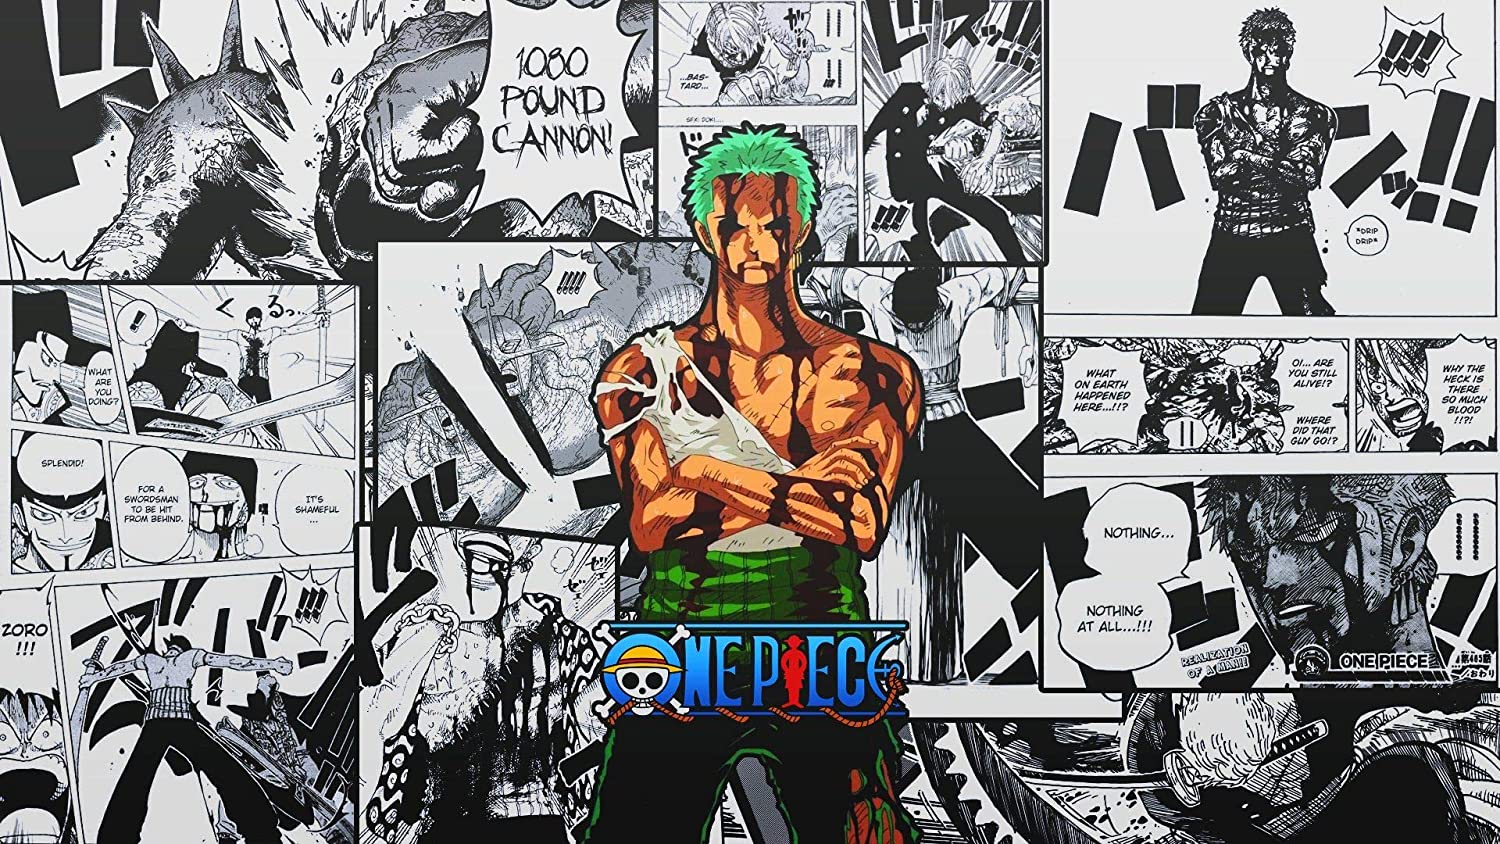 Buy Anime One Piece Roronoa Zoro Manga Poster and Prints Unframed Wall Art Gifts Decor 12x18 Online in Taiwan. B089M5SG5D